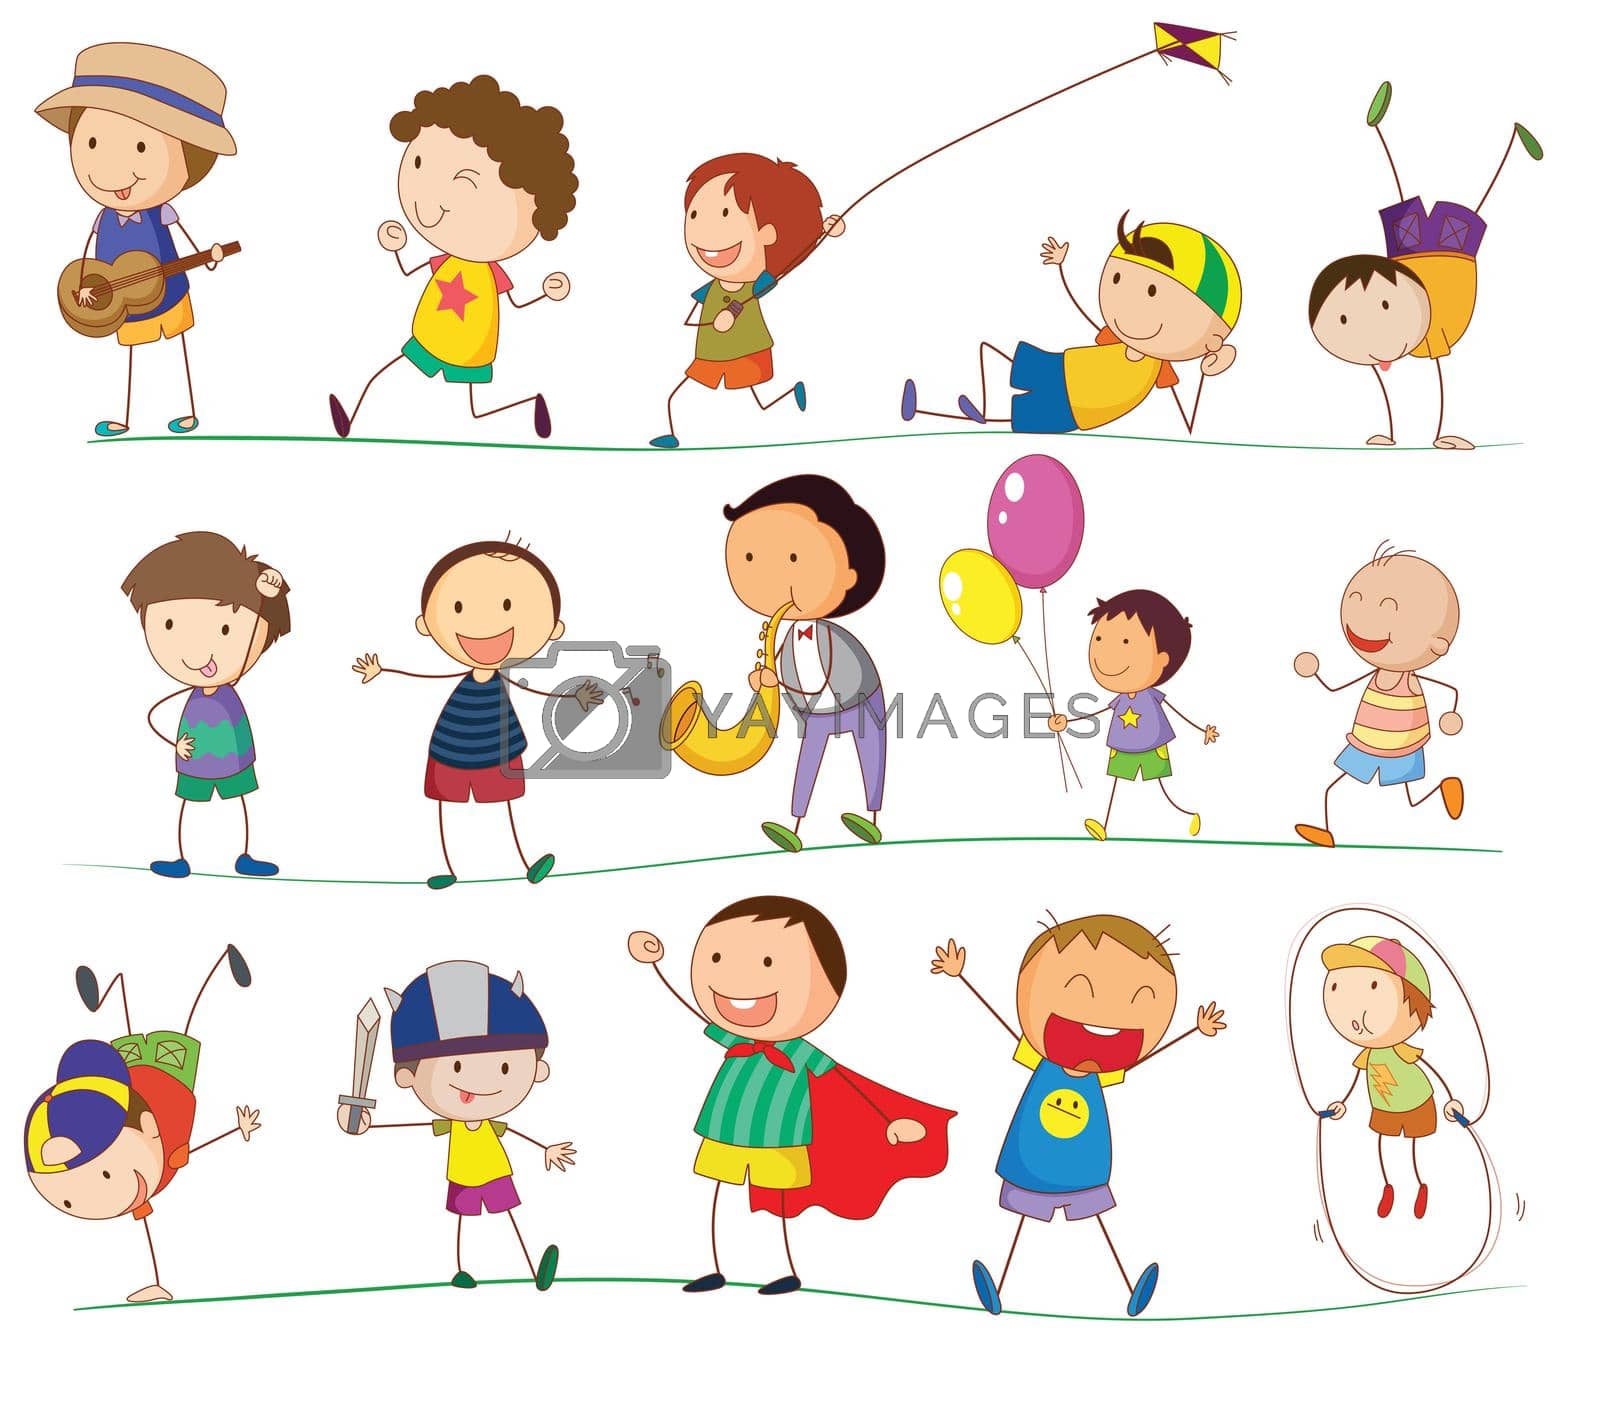 Royalty free image of boys doing various activites by iimages